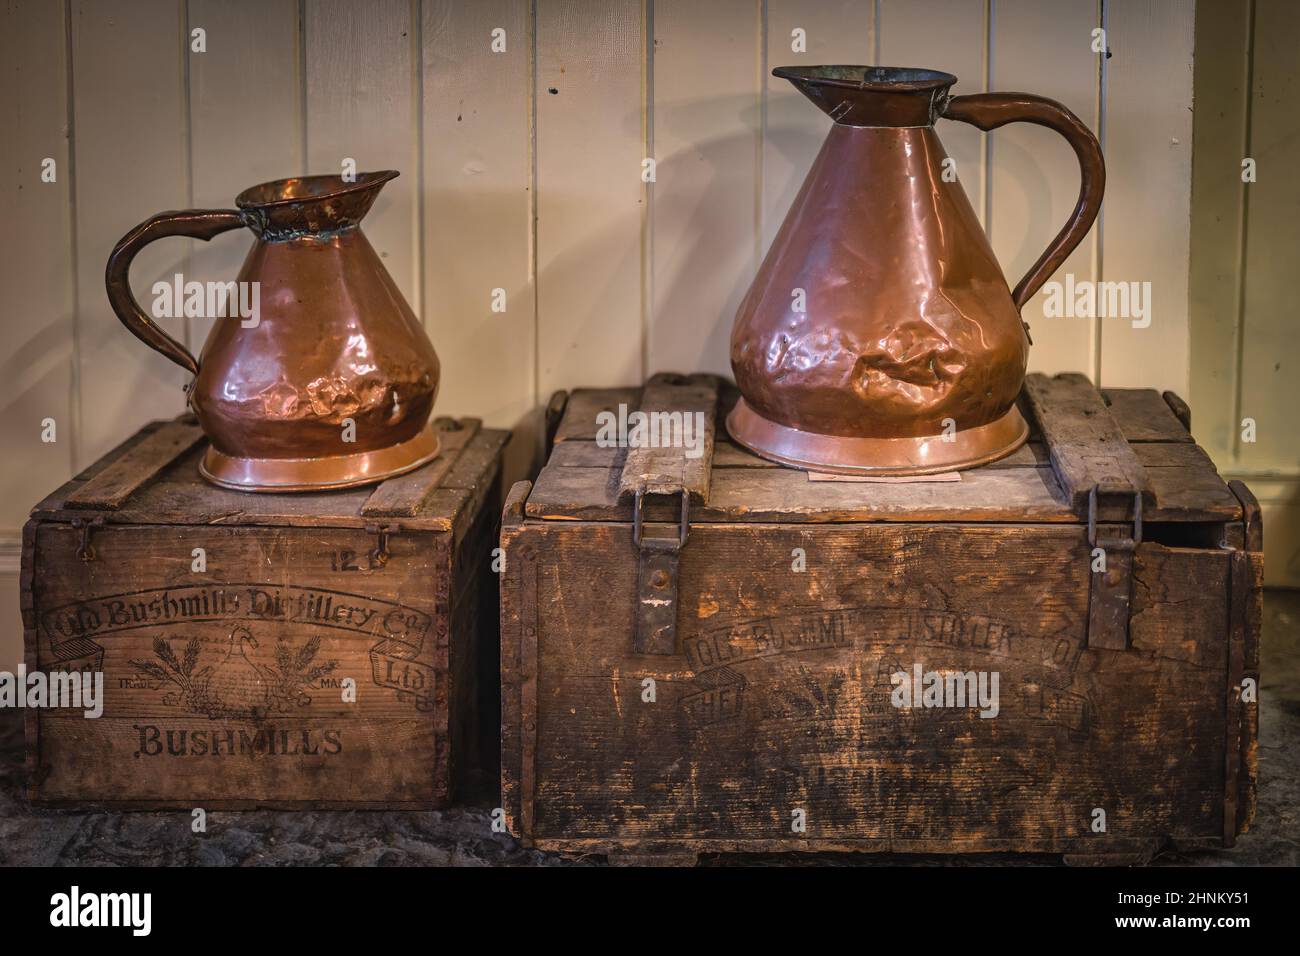 Vintage copper jugs standing on wooden crates with Bushmills whiskey bandings Stock Photo